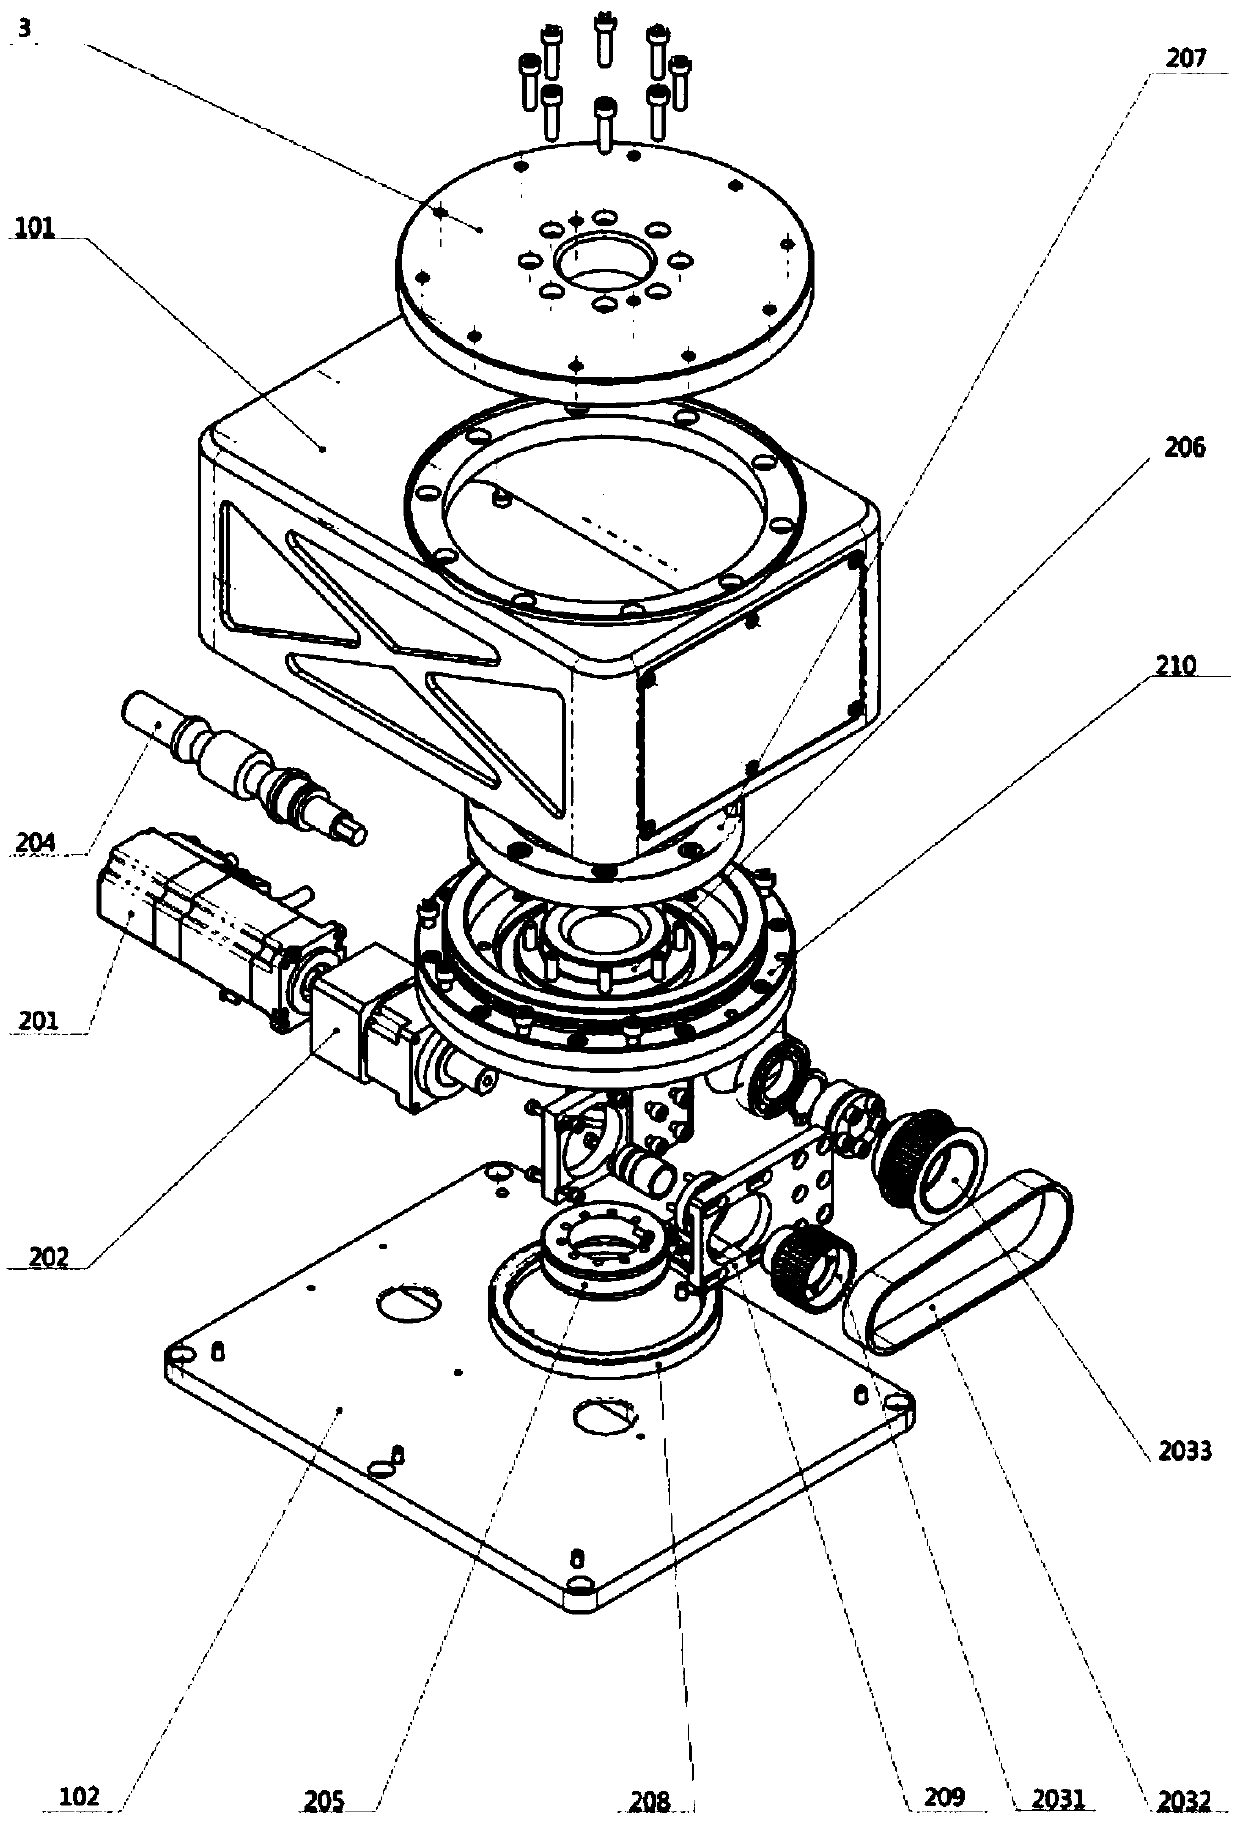 Azimuth scanning positioning mechanism and radar system